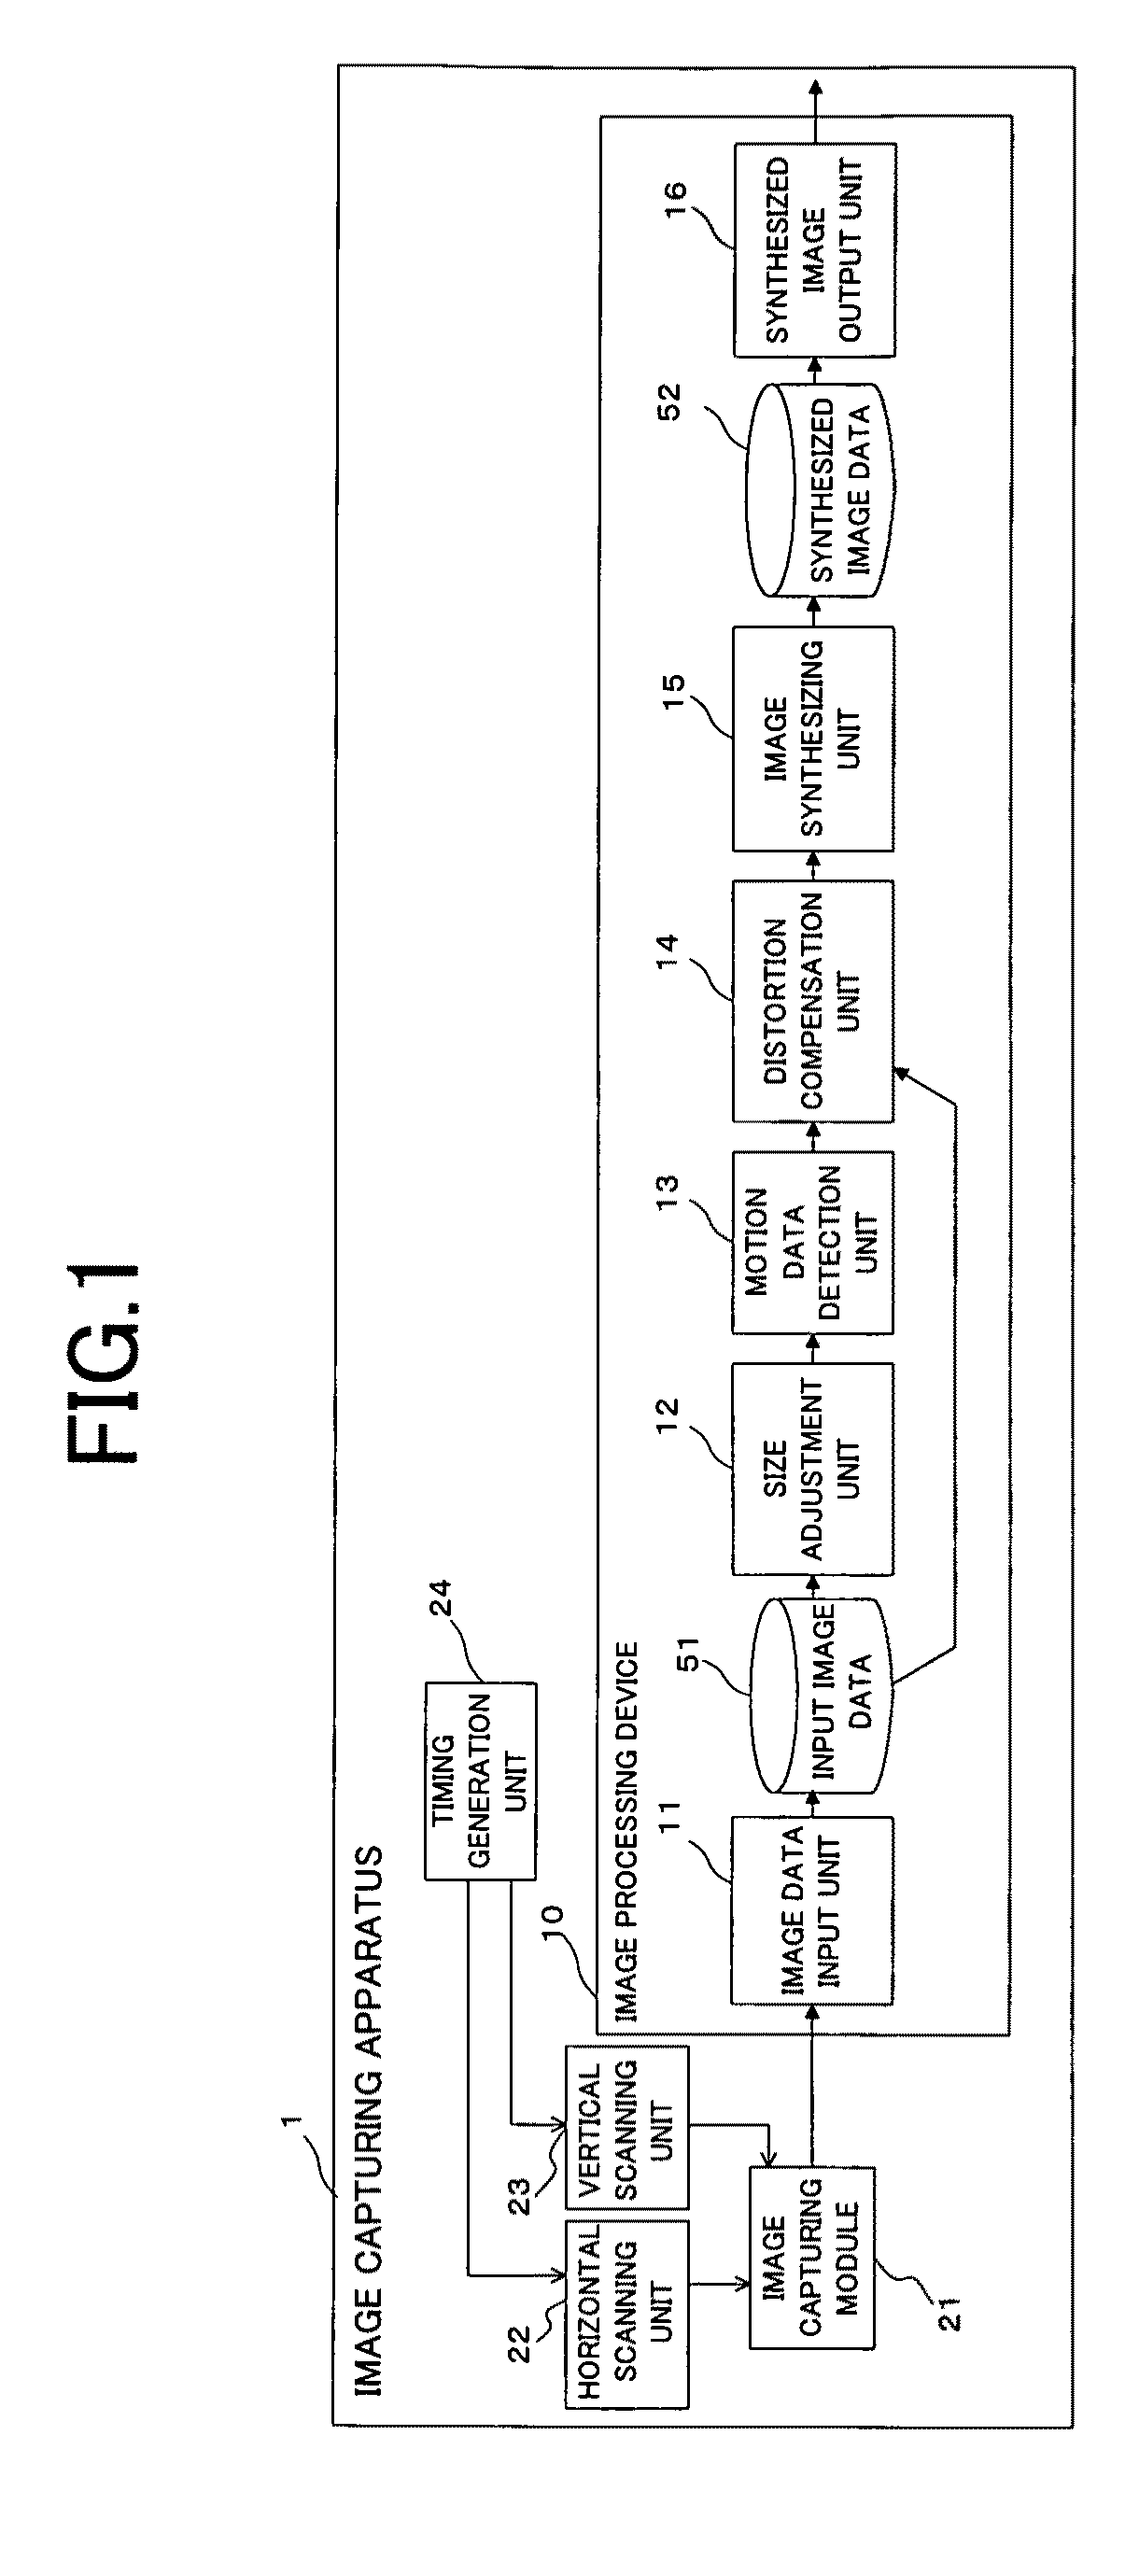 Method and apparatus for capturing an image